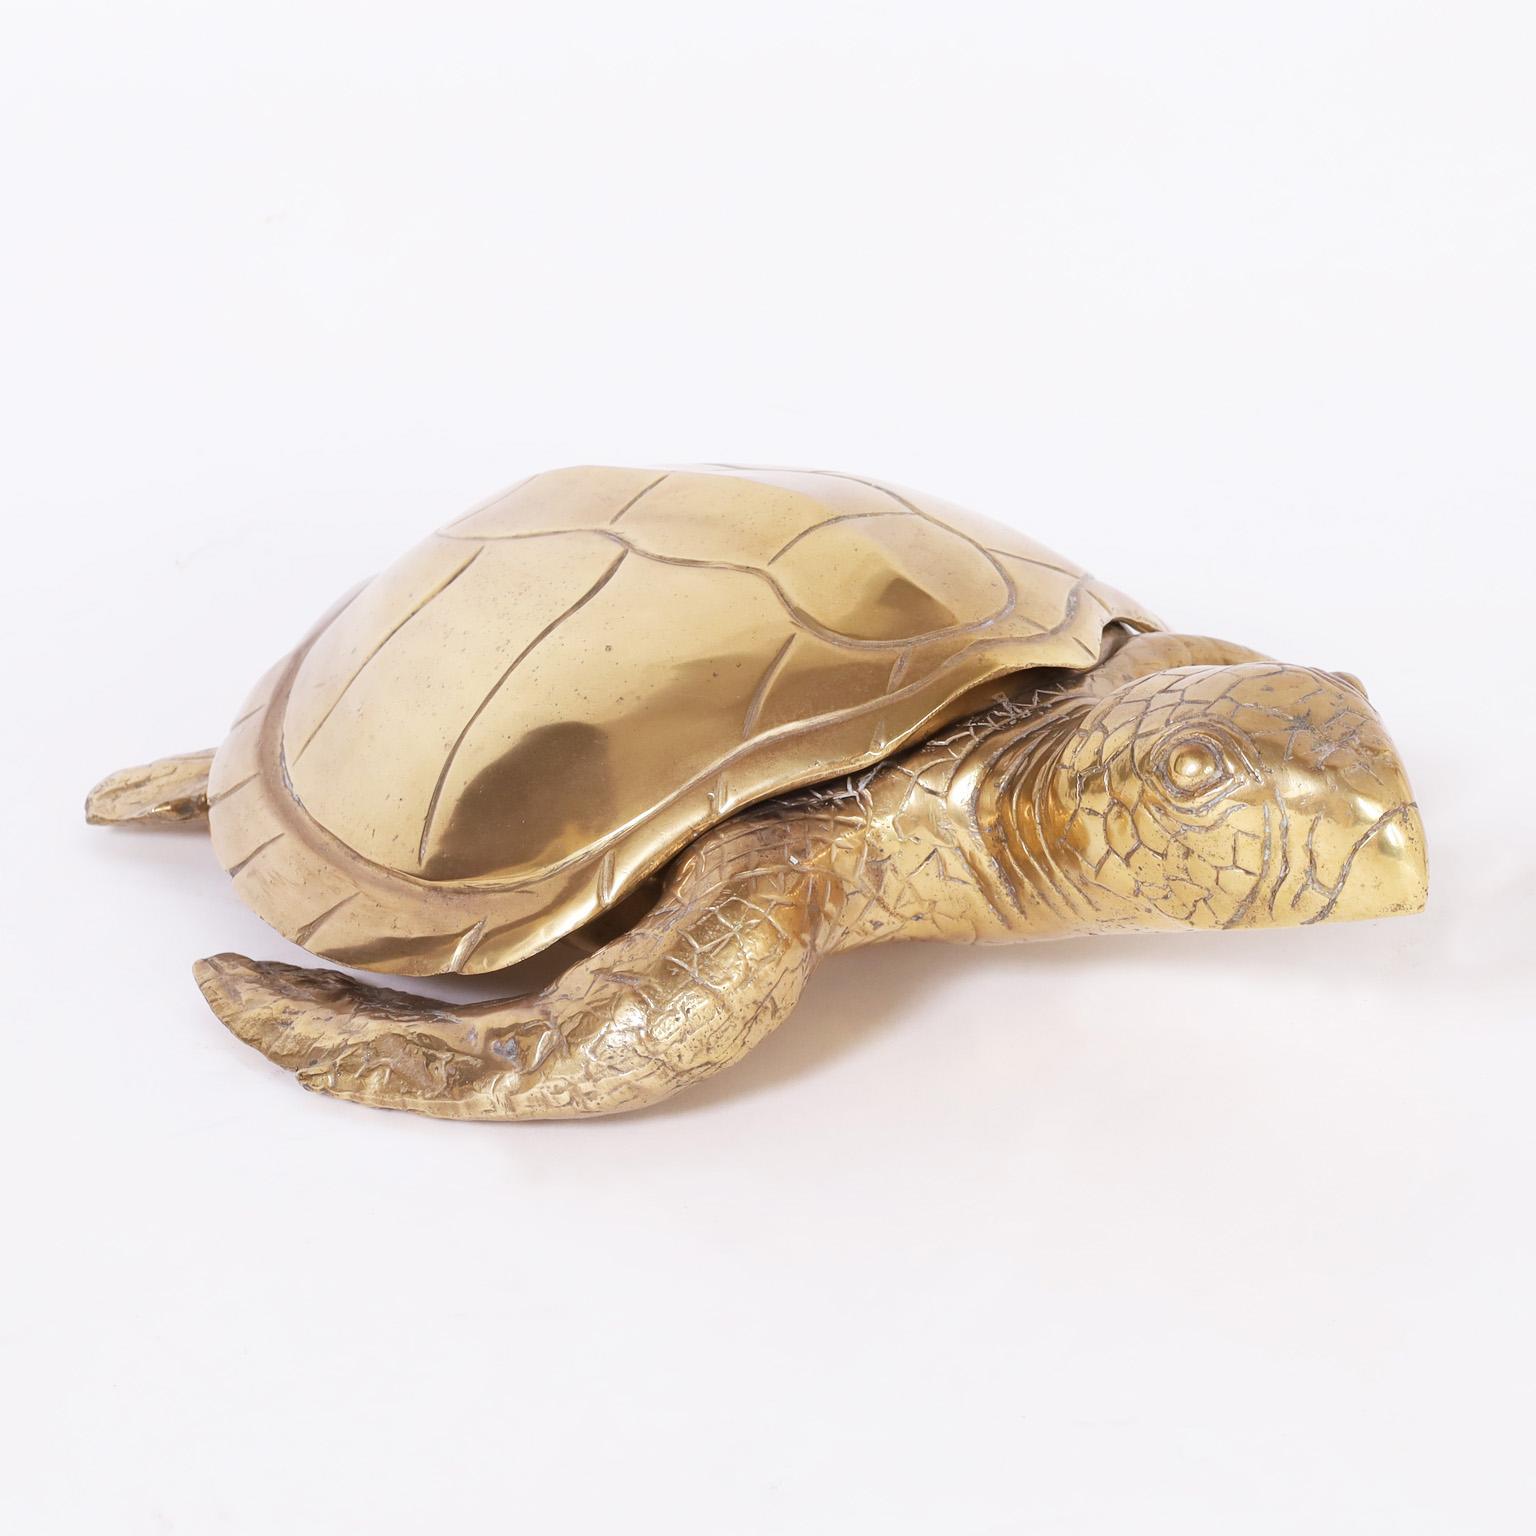 Life size sea turtle sculpture or object of art crafted in cast brass in a life like form with removable shell.